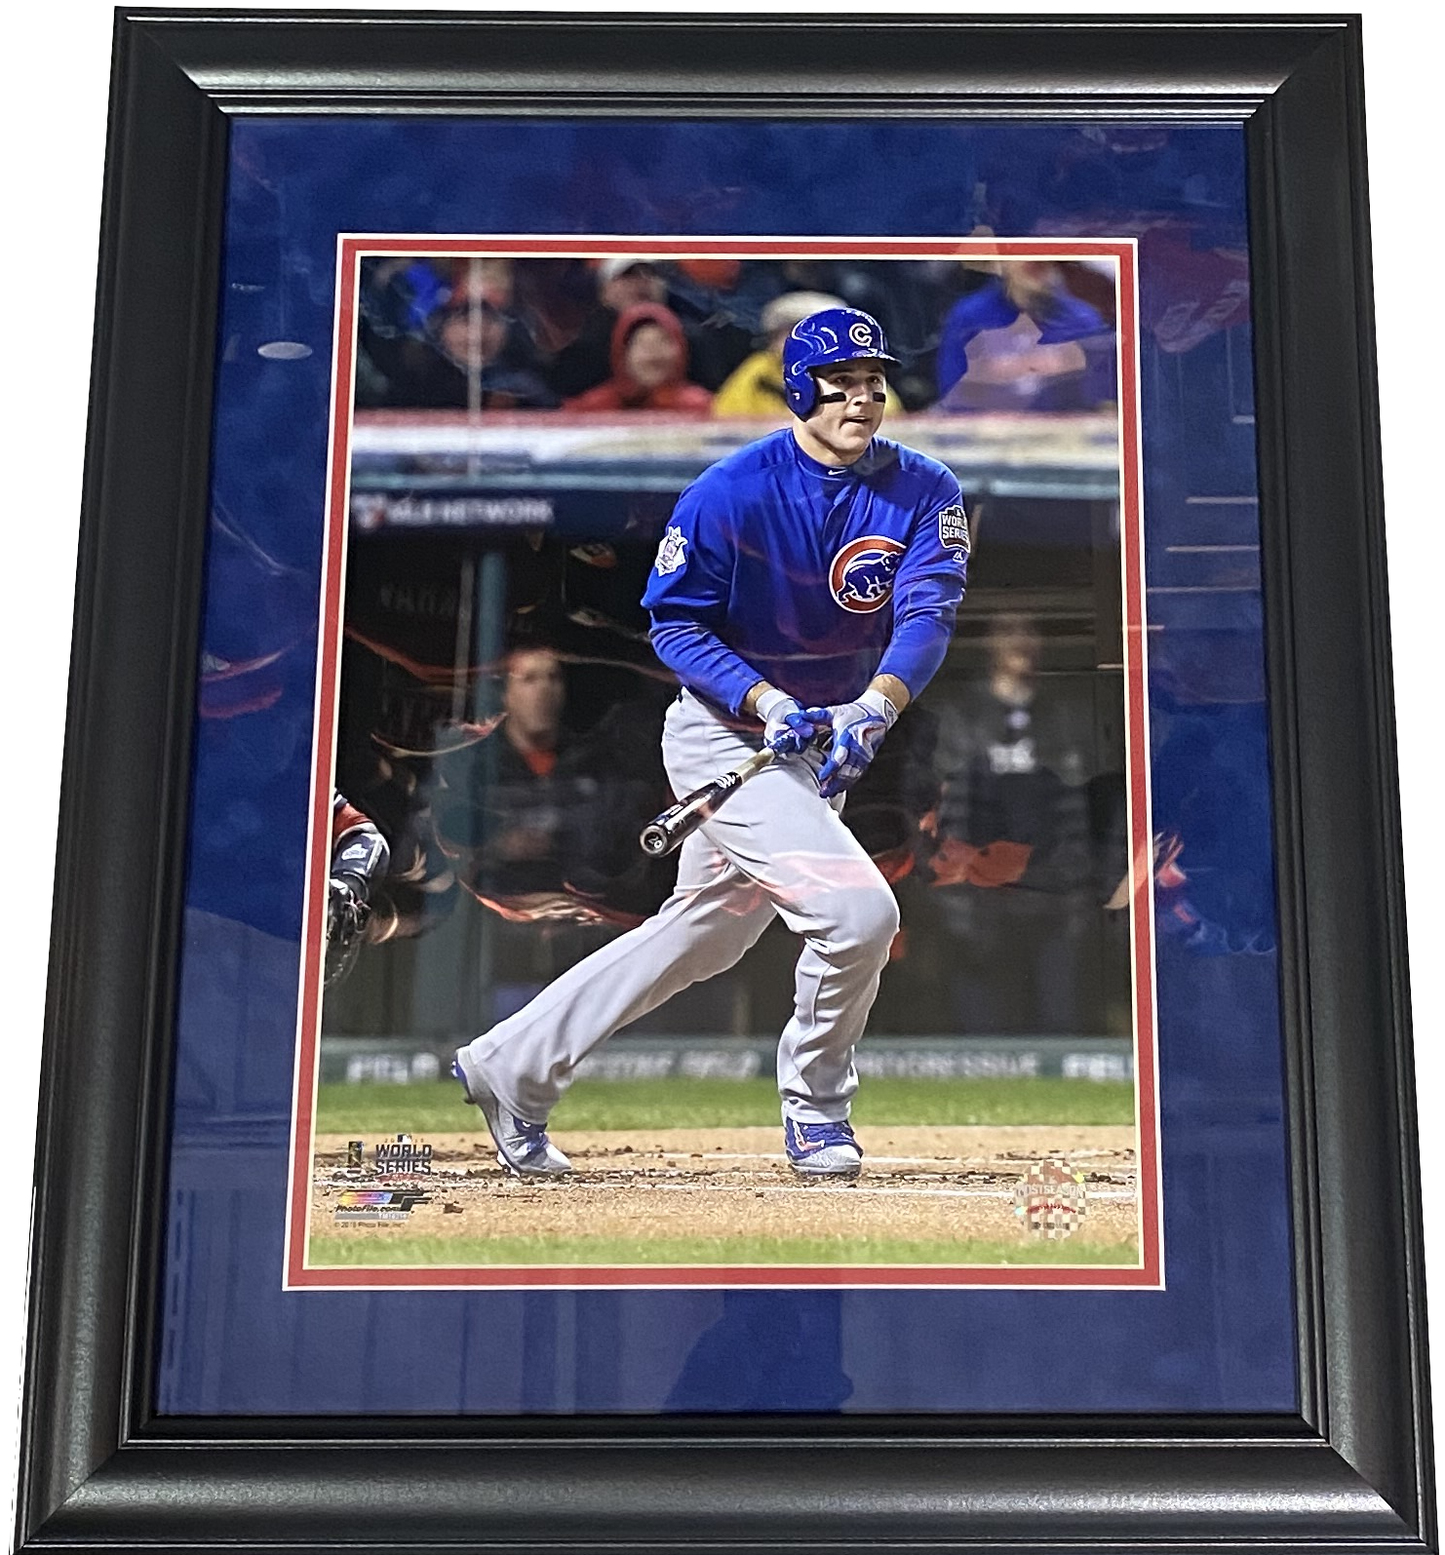 Chicago Cubs Anthony Rizzo "Alt Blue Jersey" 2016 World Series 18" x 21" Framed Photo